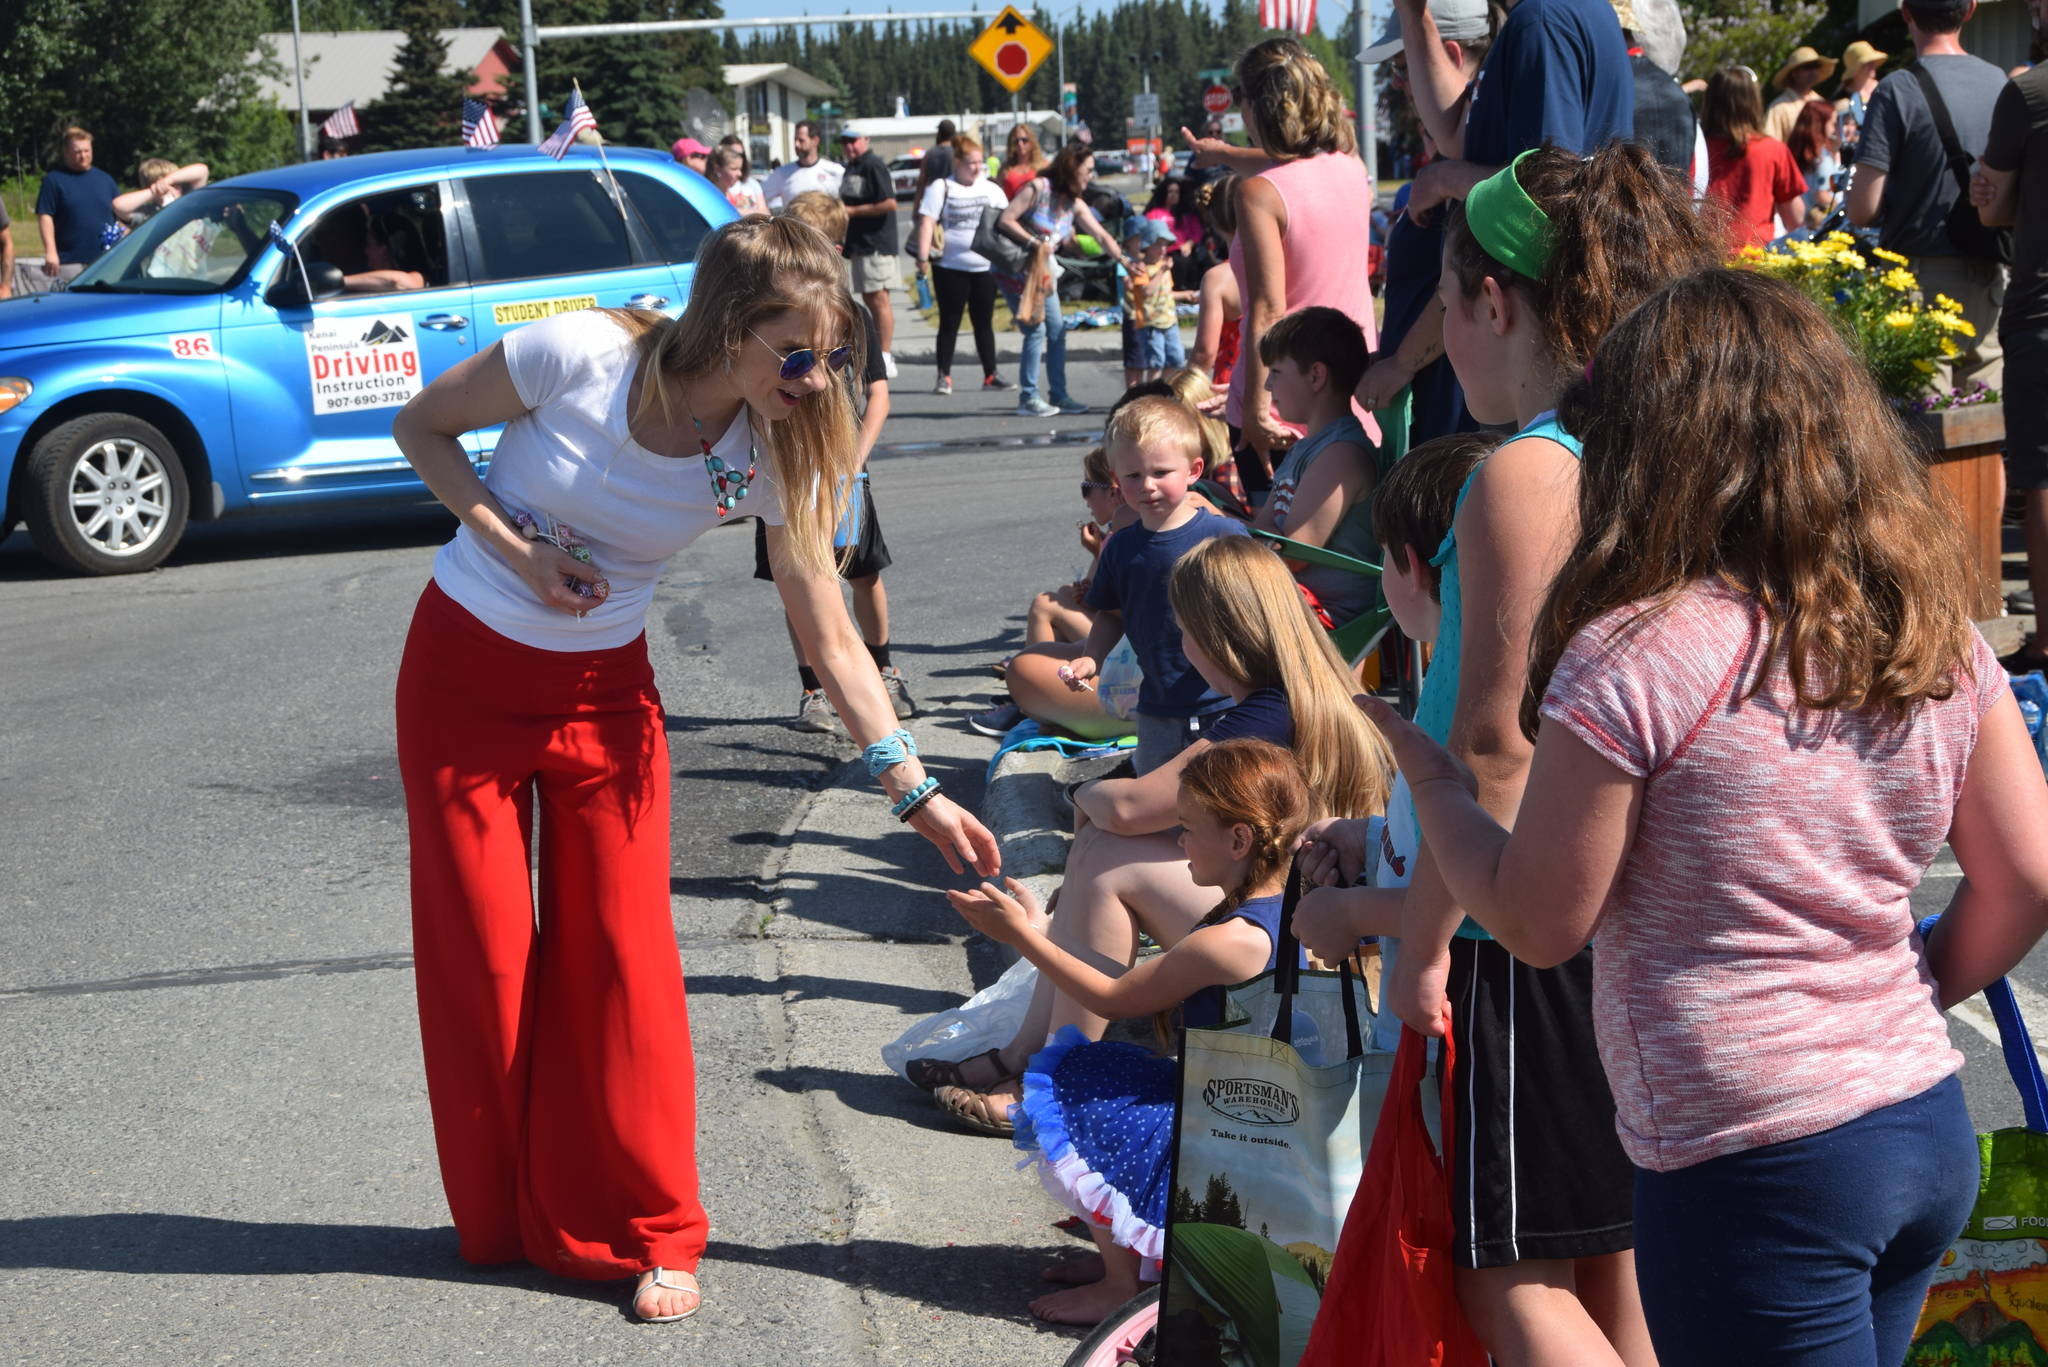 A volunteer from AK Kids hands out candy during the July 4th parade in Kenai, Alaska. (Photo by Brian Mazurek/Peninsula Clarion)